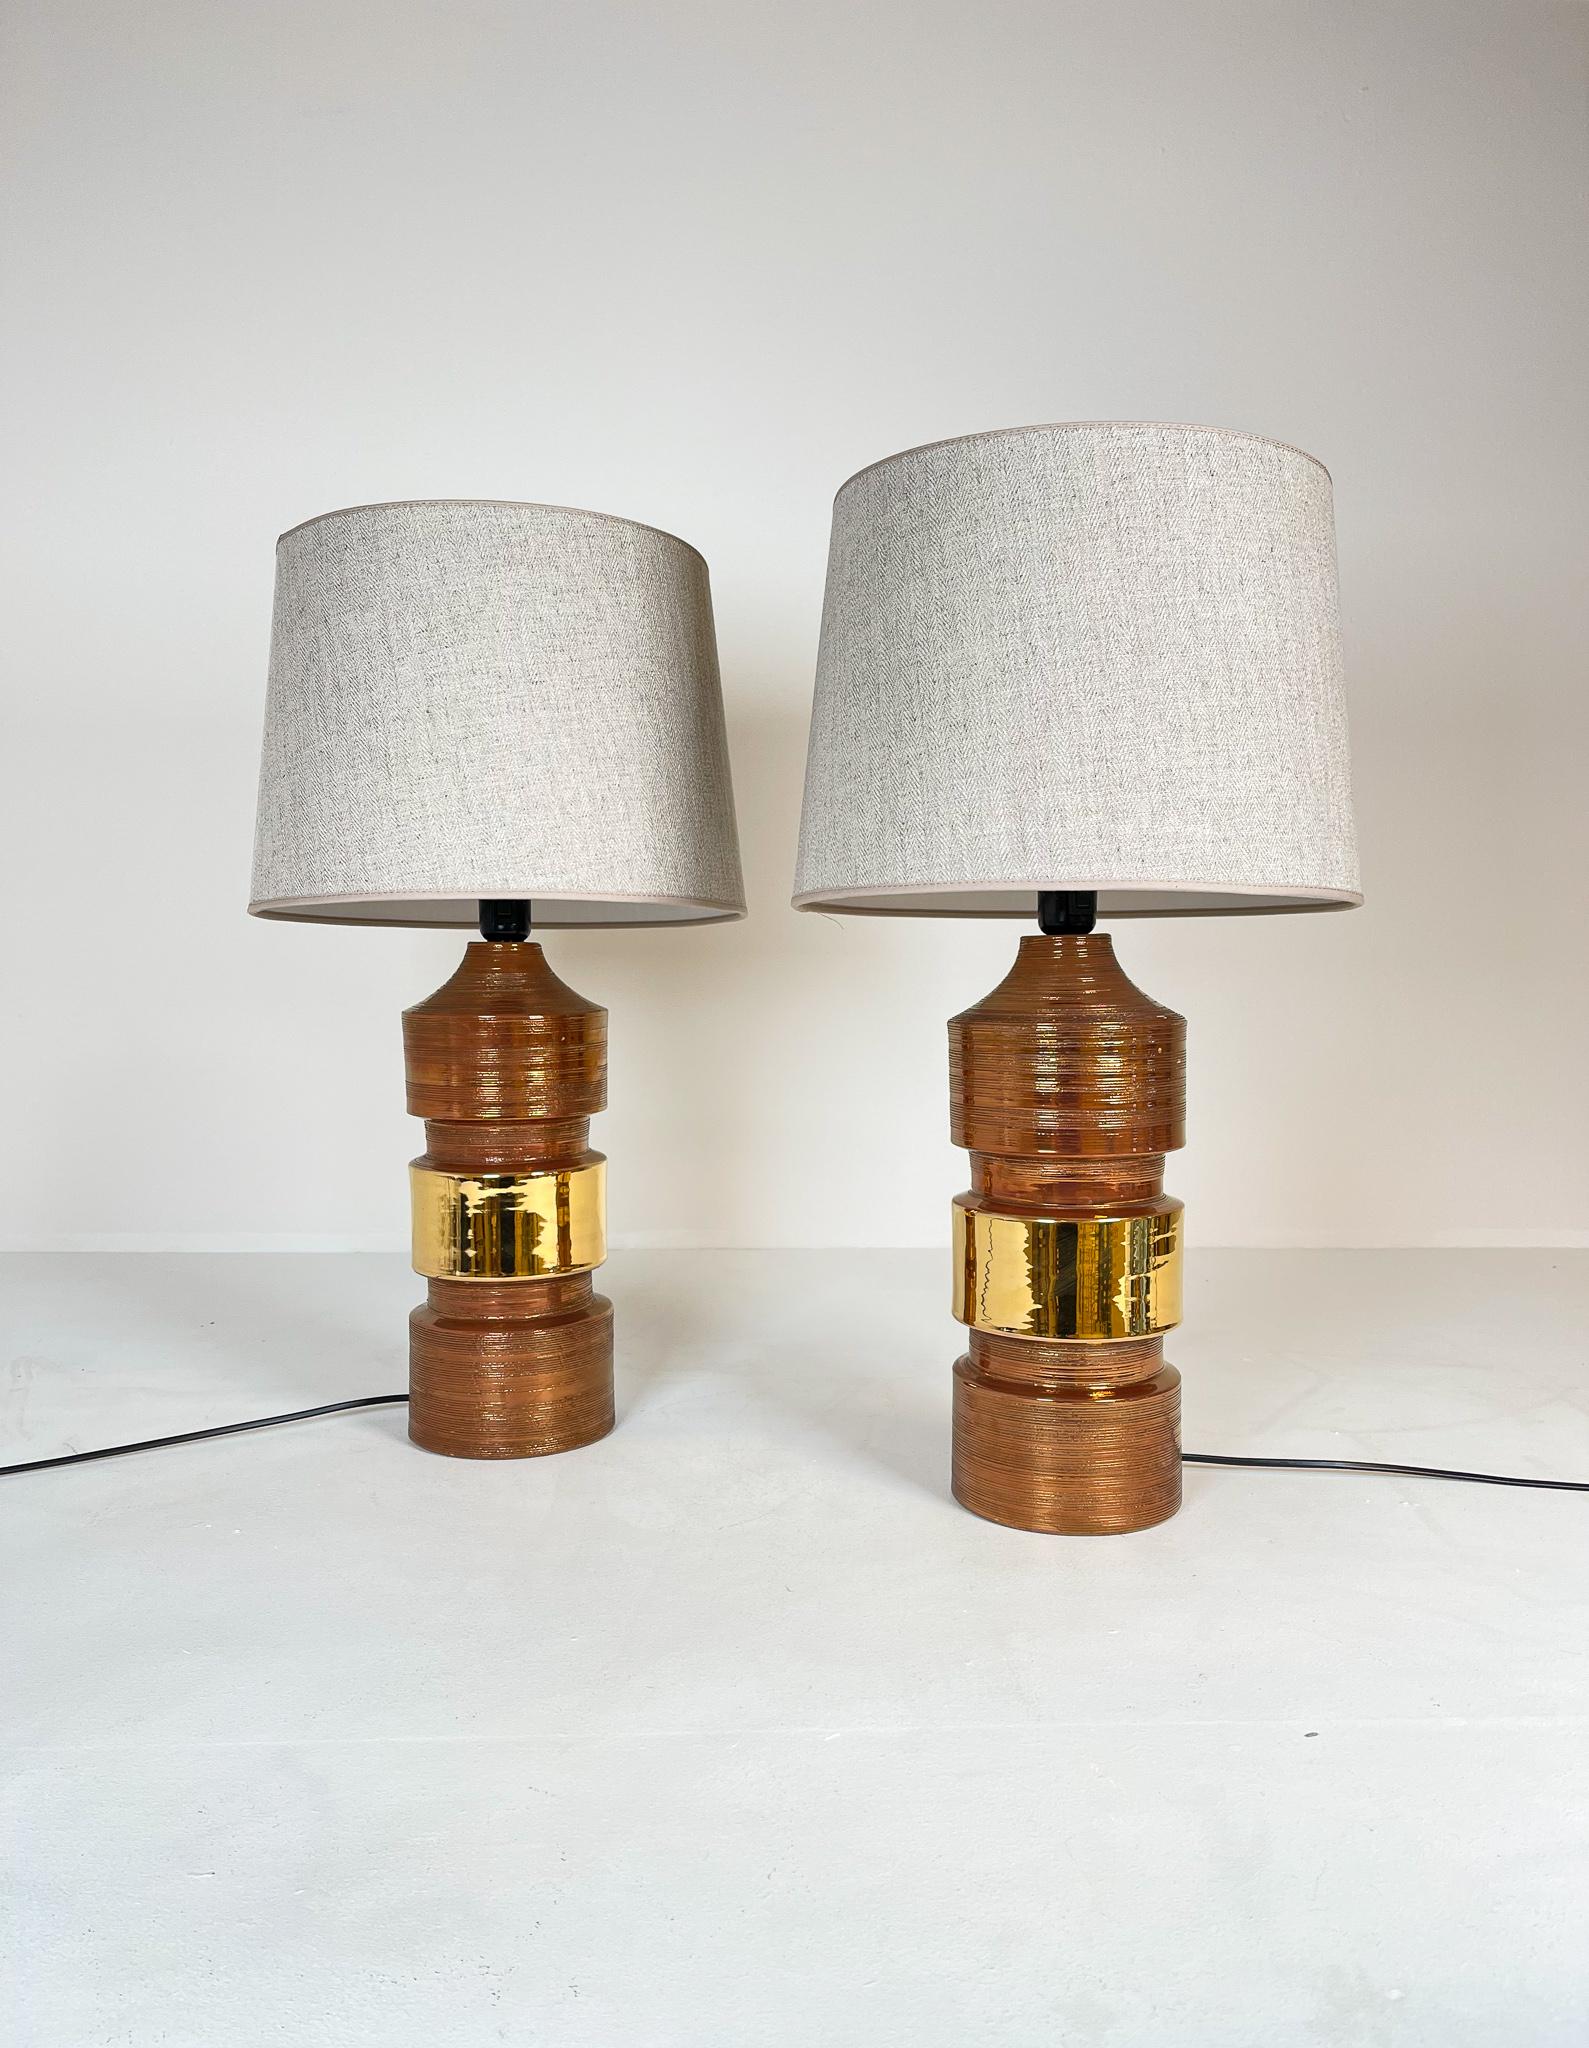 Large and heavy pair of cylinder-shaped table lamps made in ceramic with elegant matte copper glaze finish with a golden stripe. Bittosi design with all new shades, made in Sweden. This pair of table lamps will give that great look to a vintage home